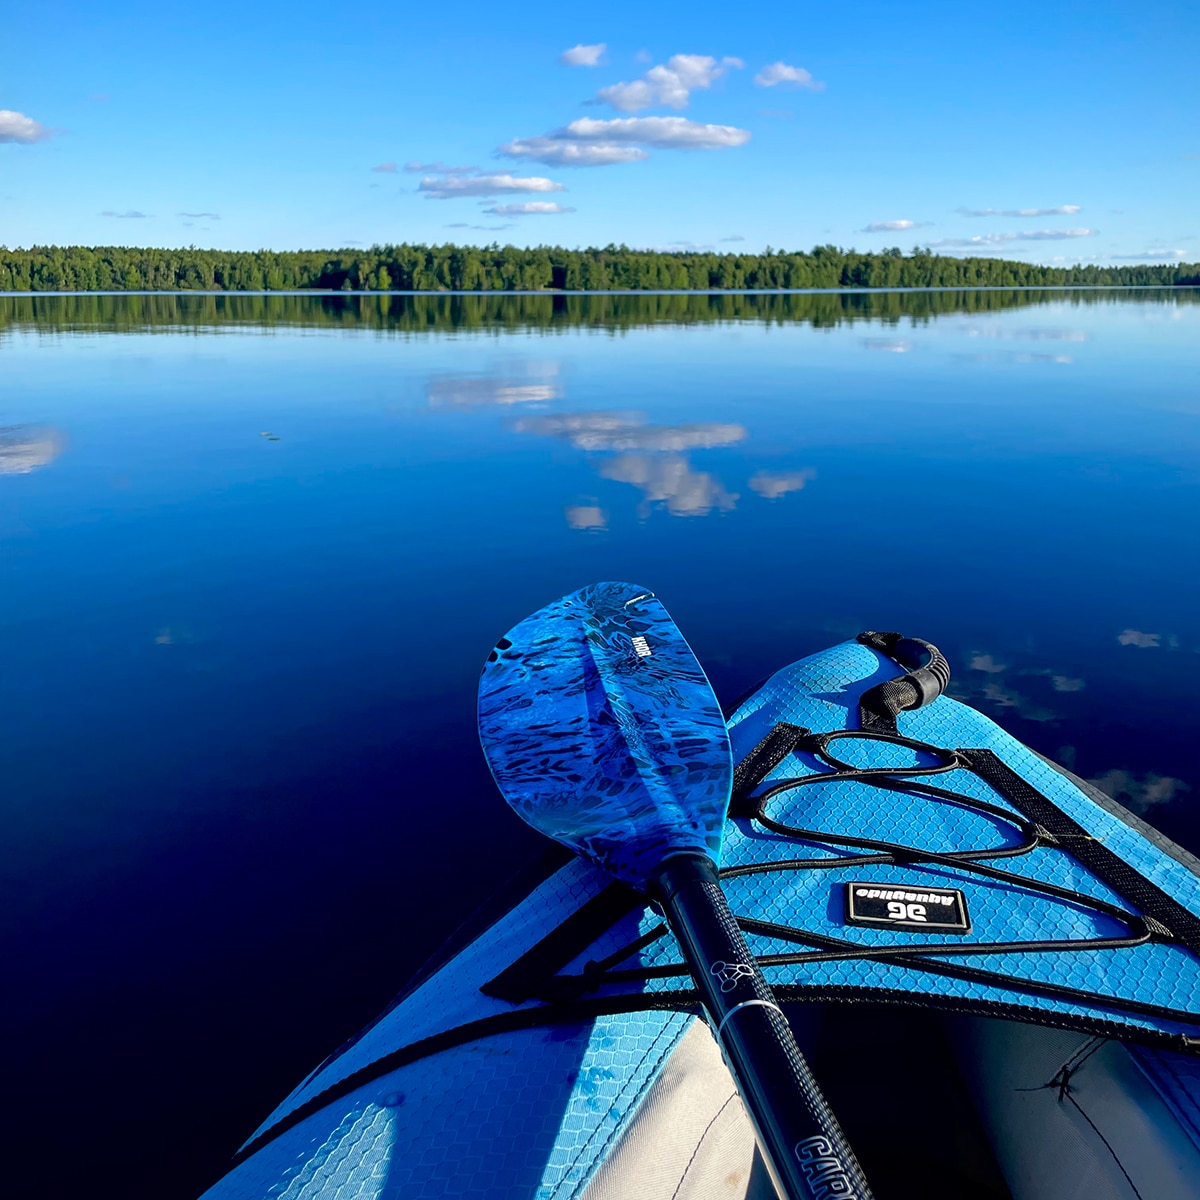 Kayaking across day lake. The lake is so calm it shows a perfect reflection of the sky.